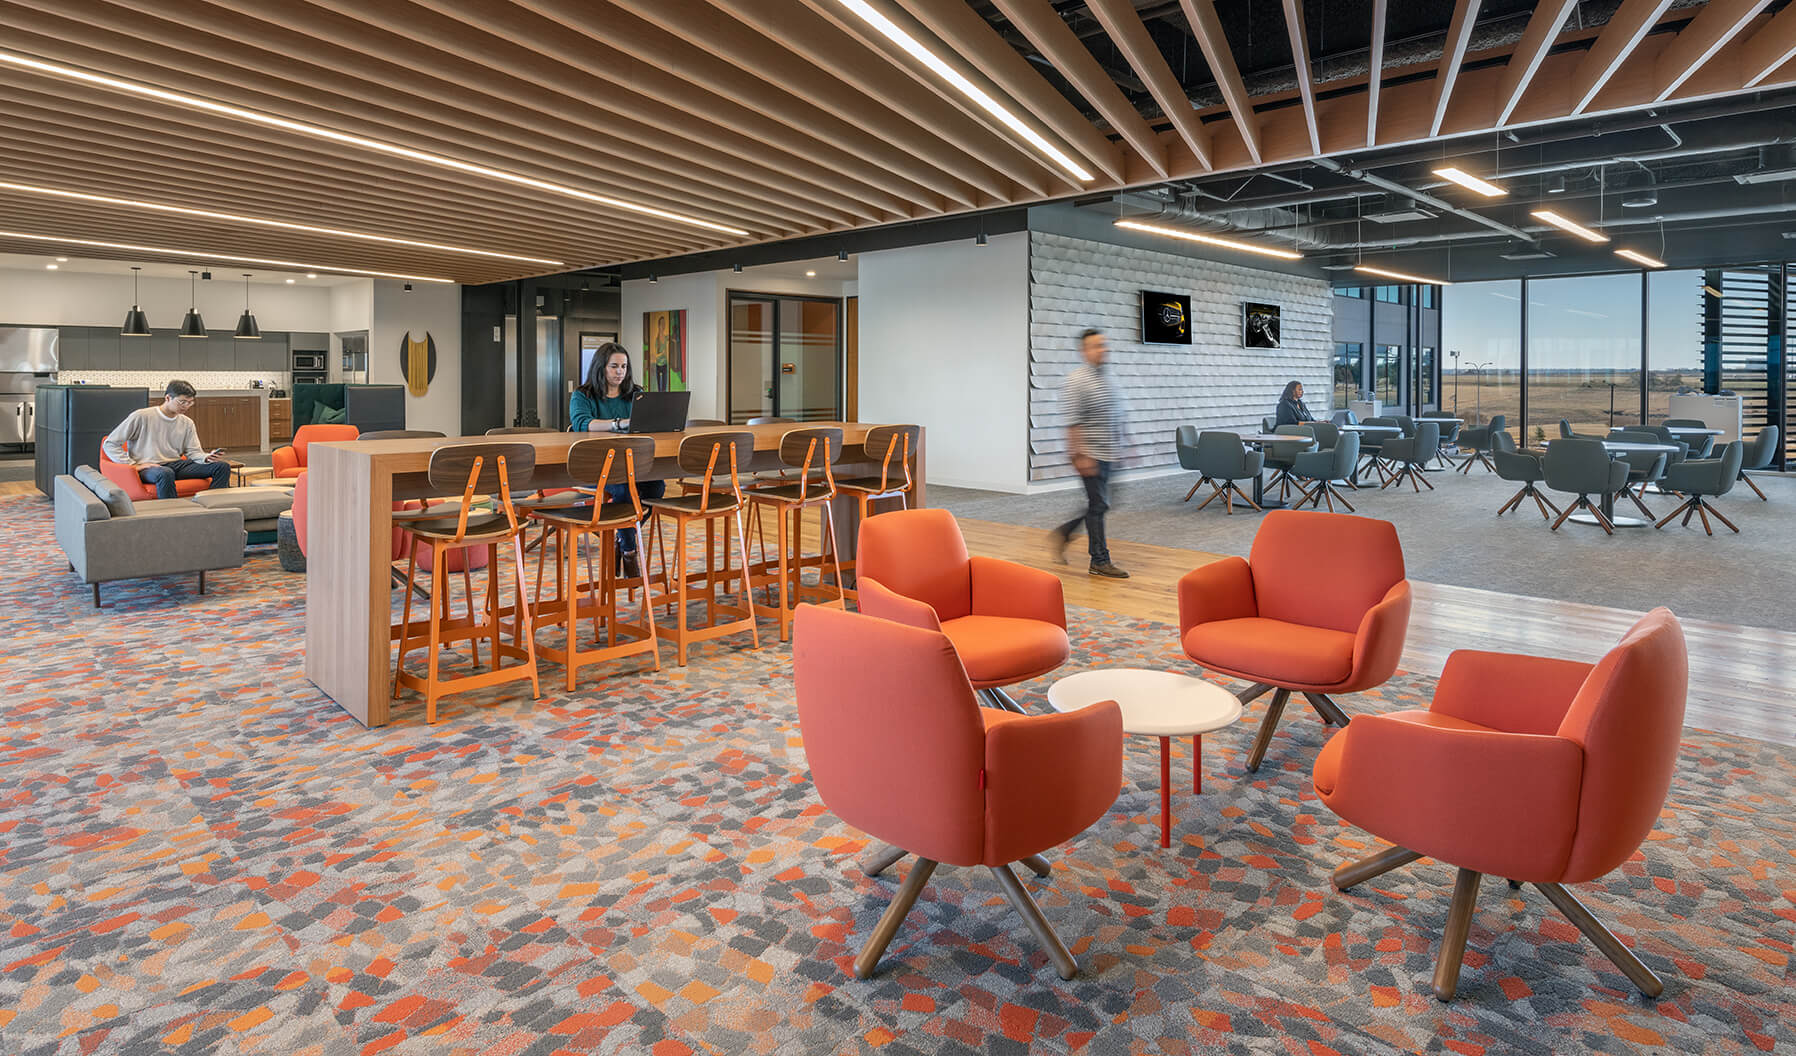 Social spaces were created to support the Mercedes-Benz Financial Services corporate culture. These zones were designed with accessible natural daylight and views of the outside landscape to enhance employee health and well-being. 